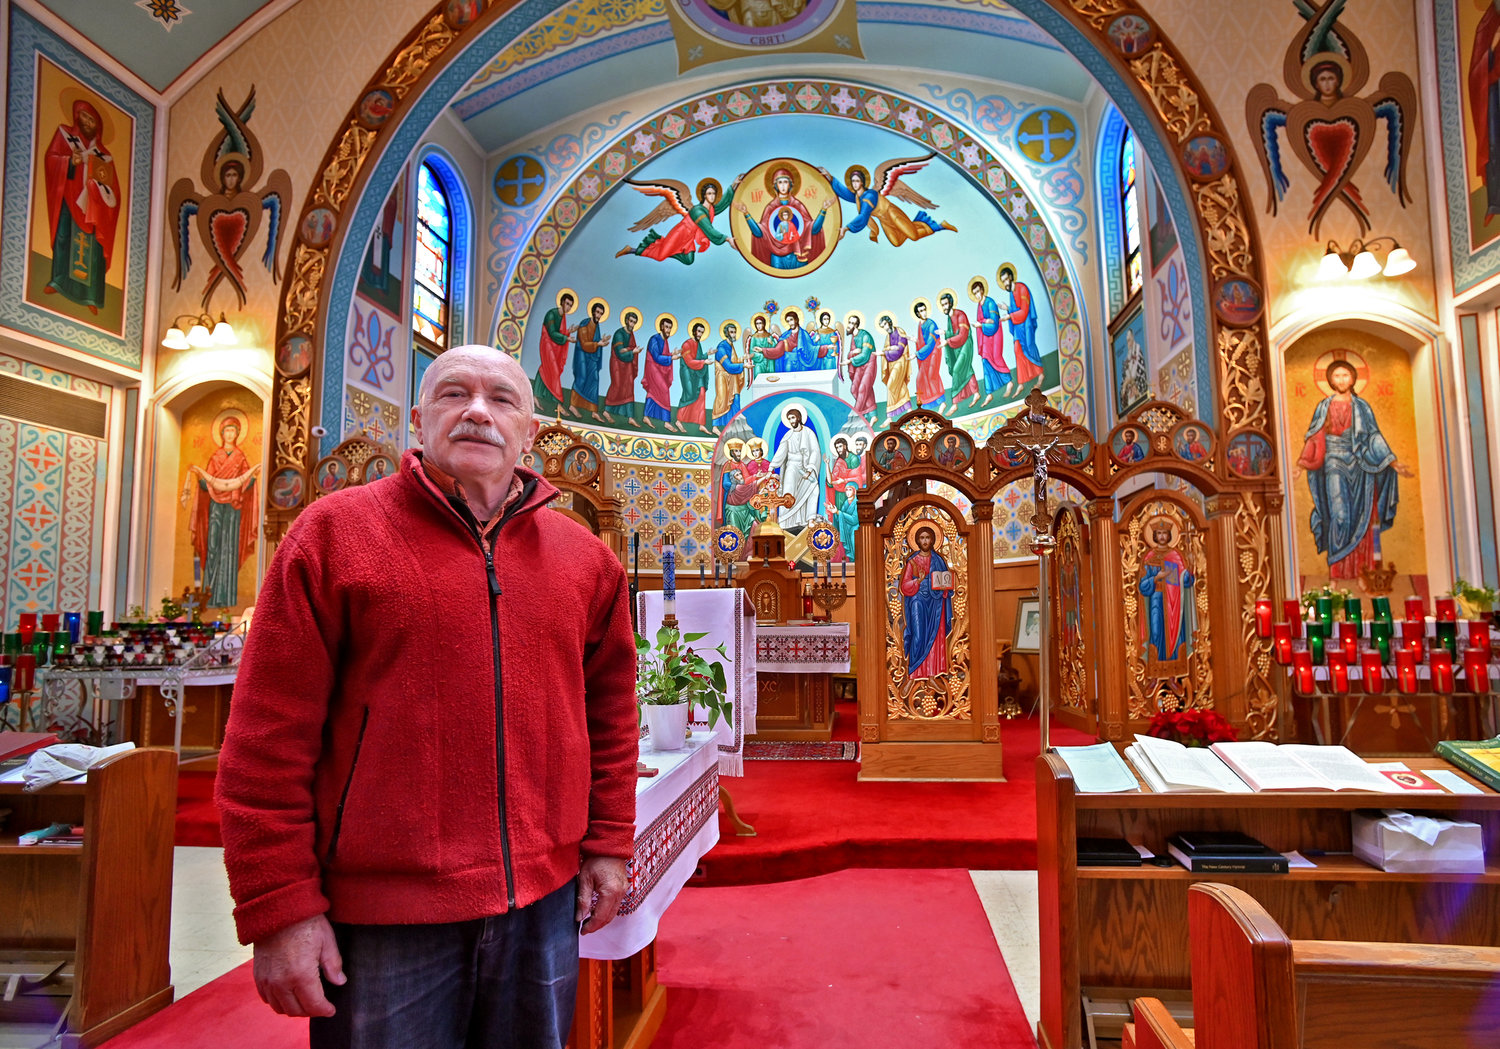 ALTAR — Zyn Jackiw, a trustee in the St. Volodymyr the Great Ukrainian Catholic Church, at 4 Cottage Place in Utica, shows a visitor the chancel and altar on Tuesday, Feb. 21. A church altar is often referred to as the “sanctuary,” meaning “sacred place.” Today at 5 p.m., St. Volodymyr will participate in a worldwide prayer and remembrance event to observe those who have died and the damage caused during Russia’s invasion of Ukraine which started one year ago.